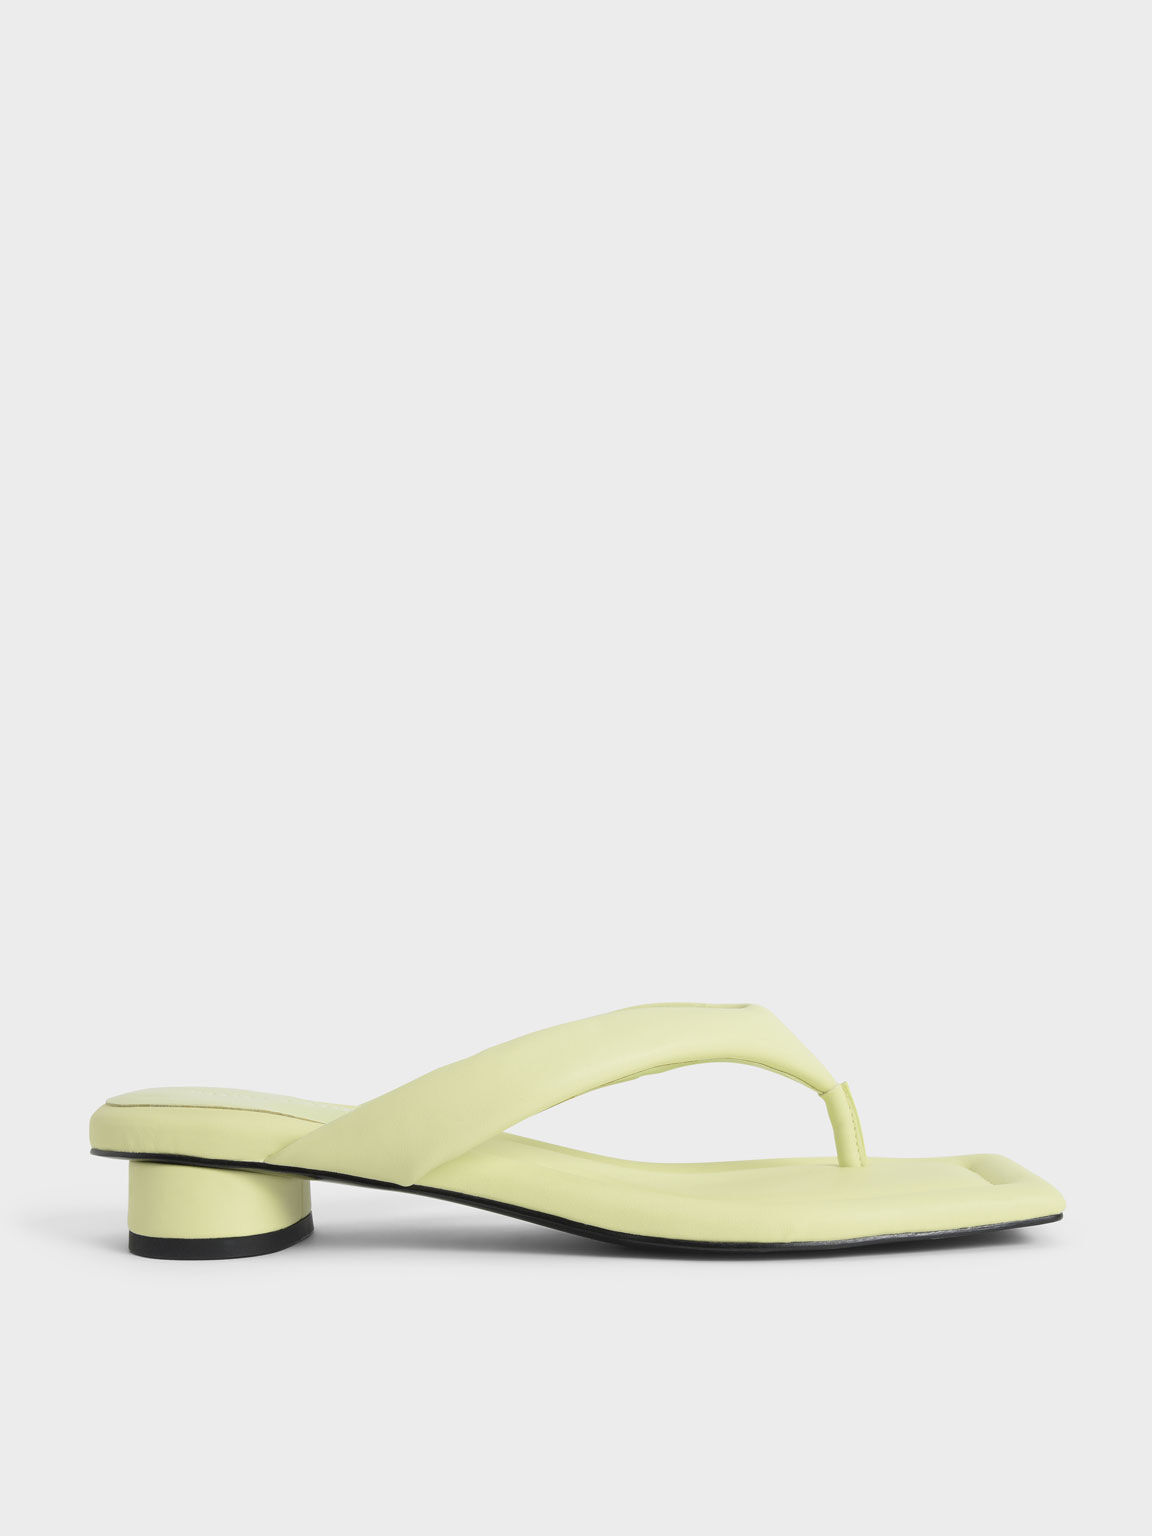 Padded Thong Sandals, Yellow, hi-res